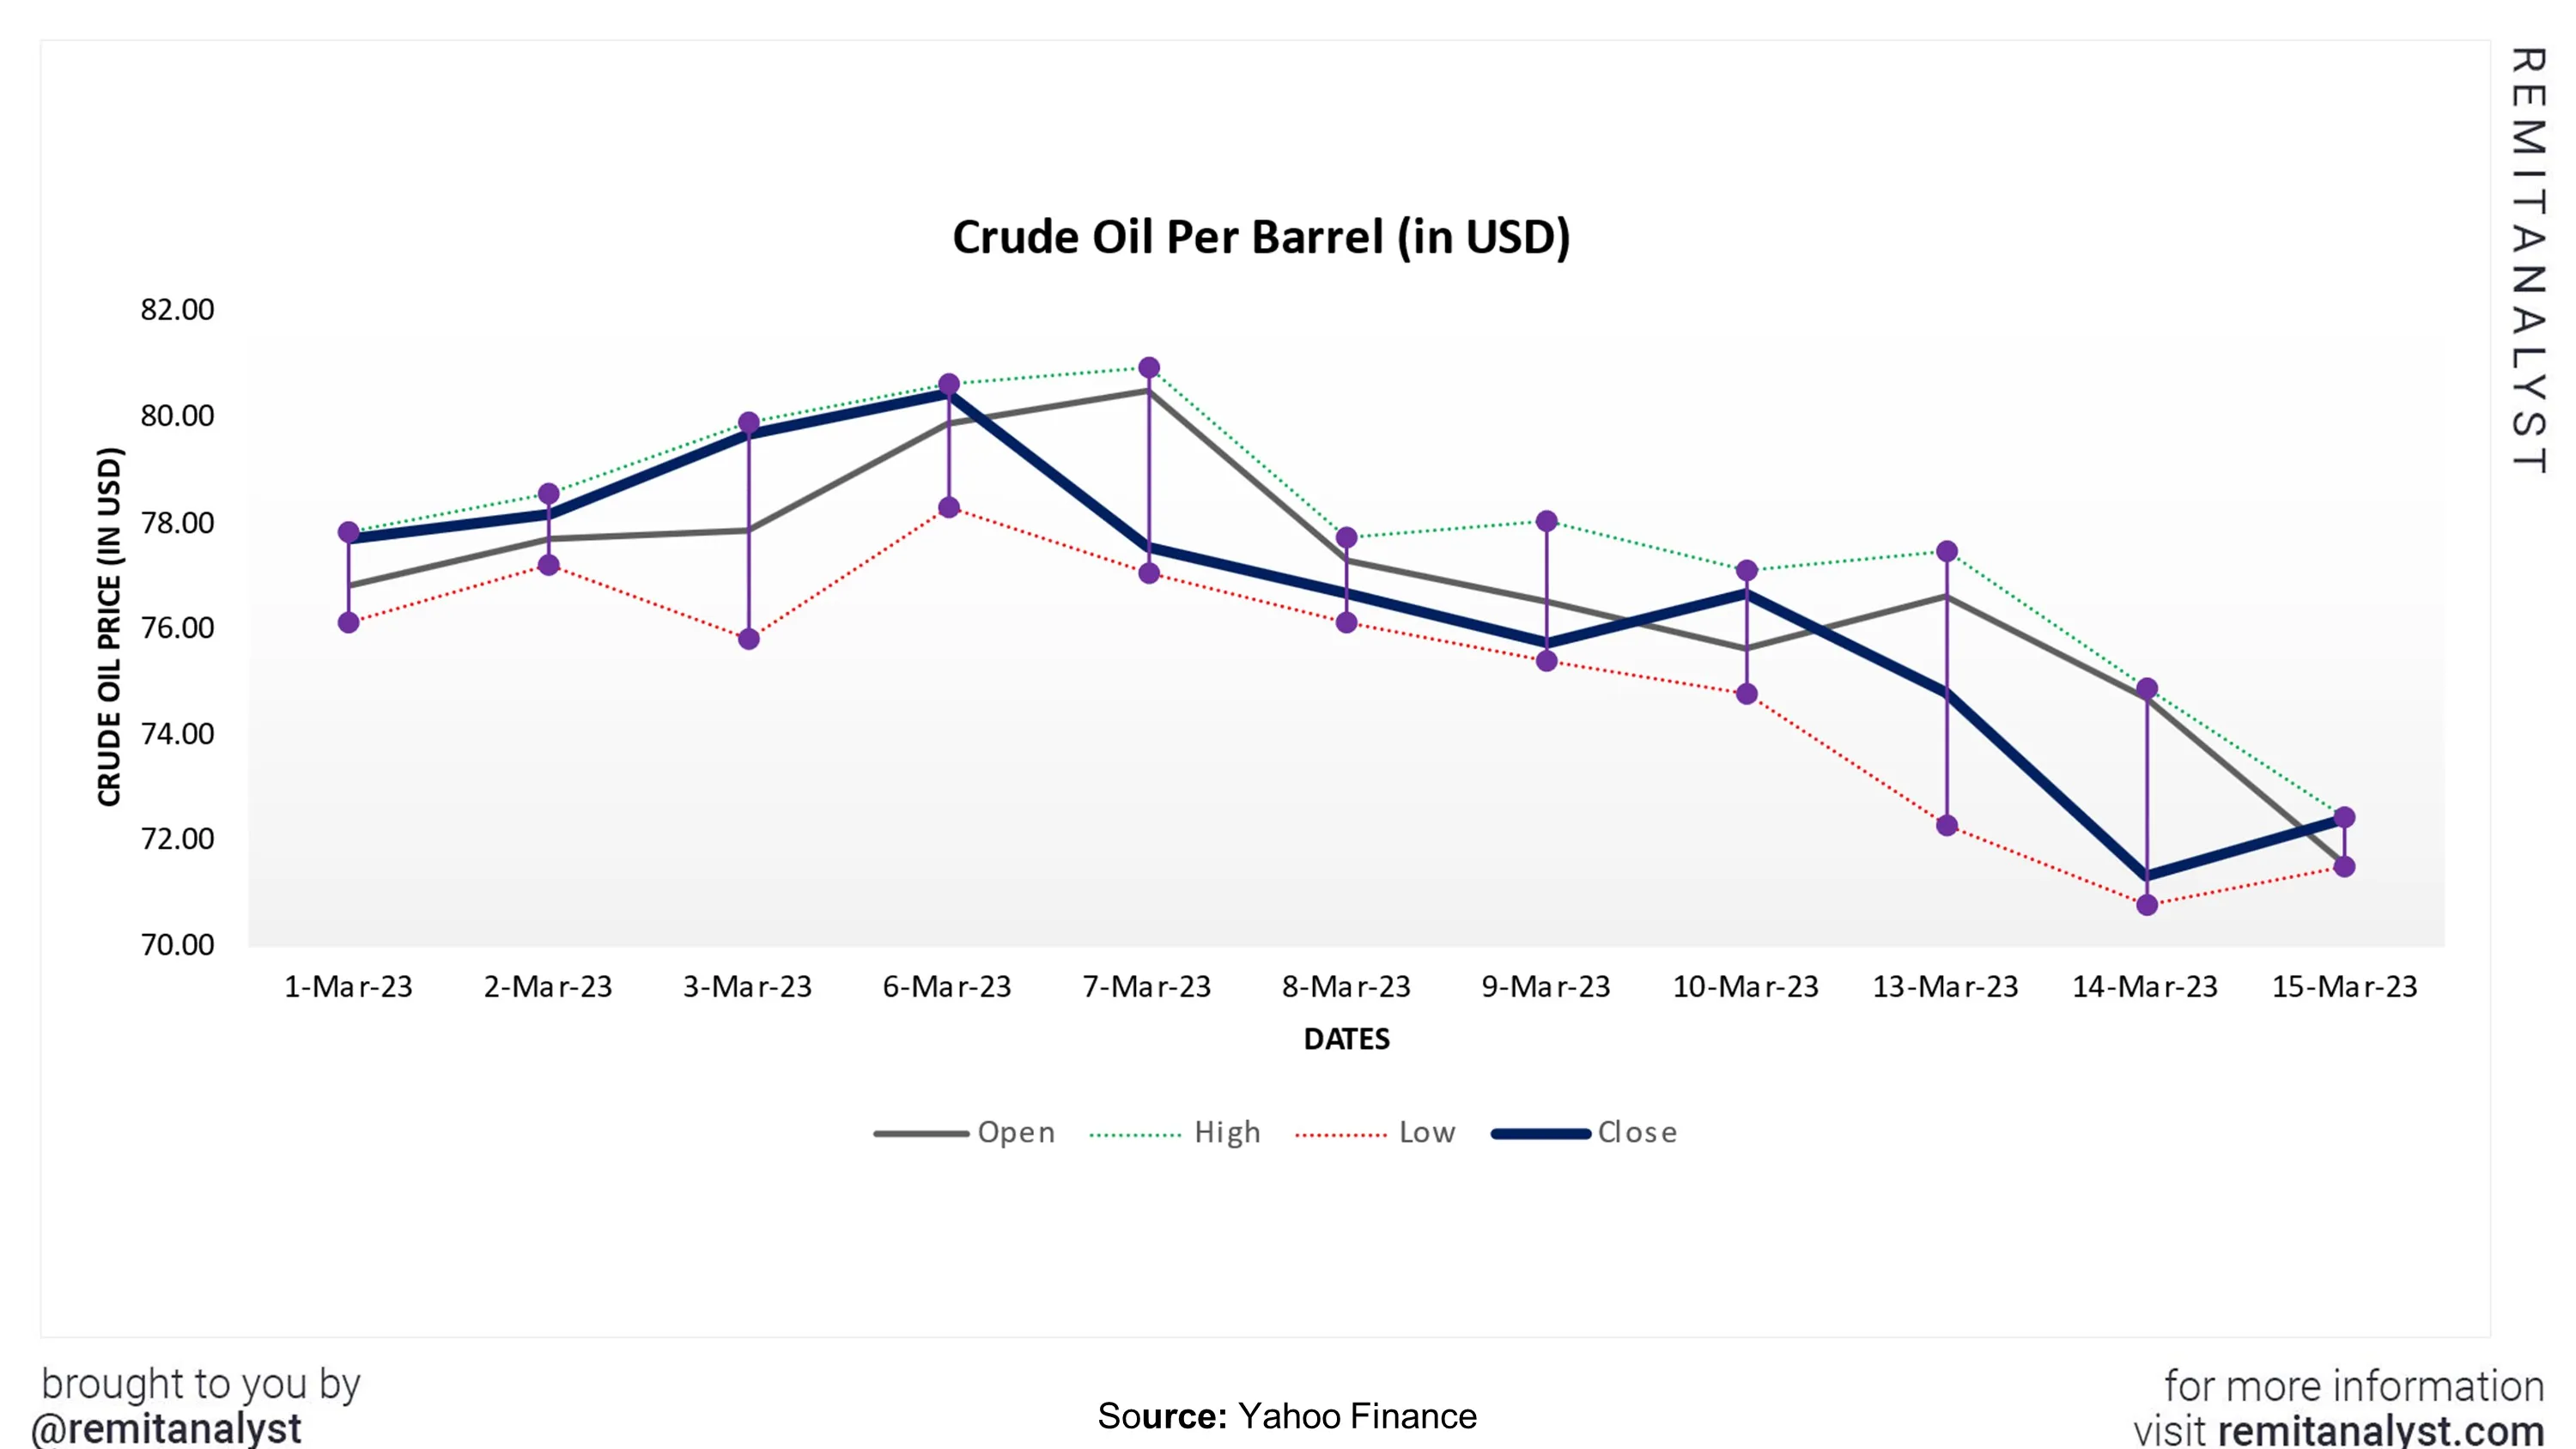 crude-oil-prices-from-1-mar-2023-to-15-mar-2023